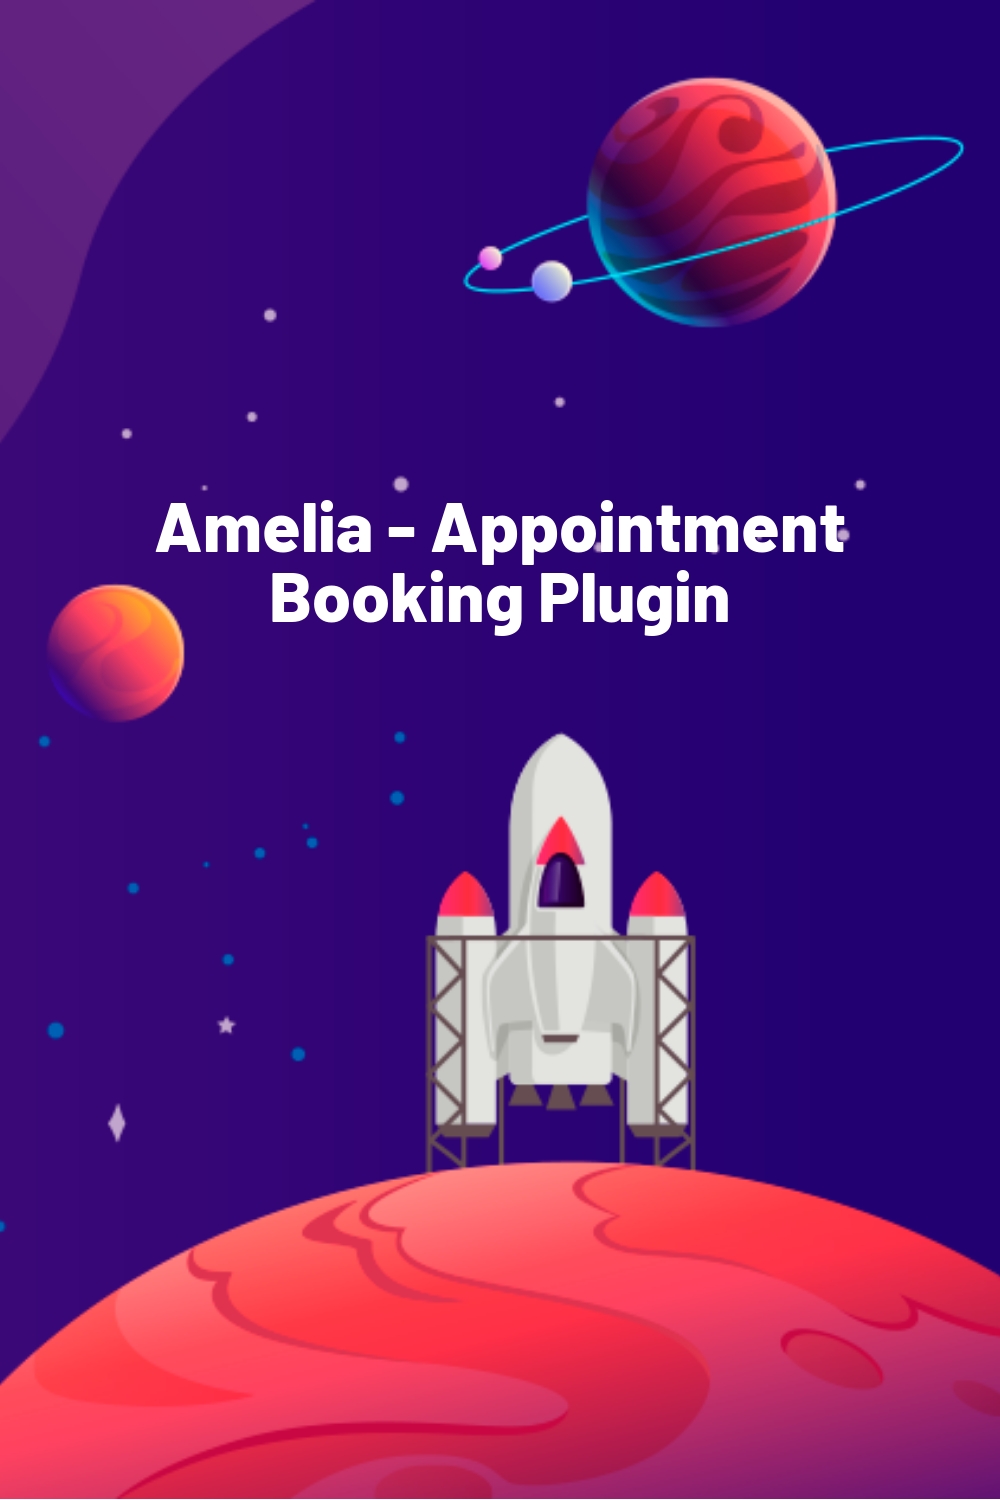 Amelia – Appointment Booking Plugin